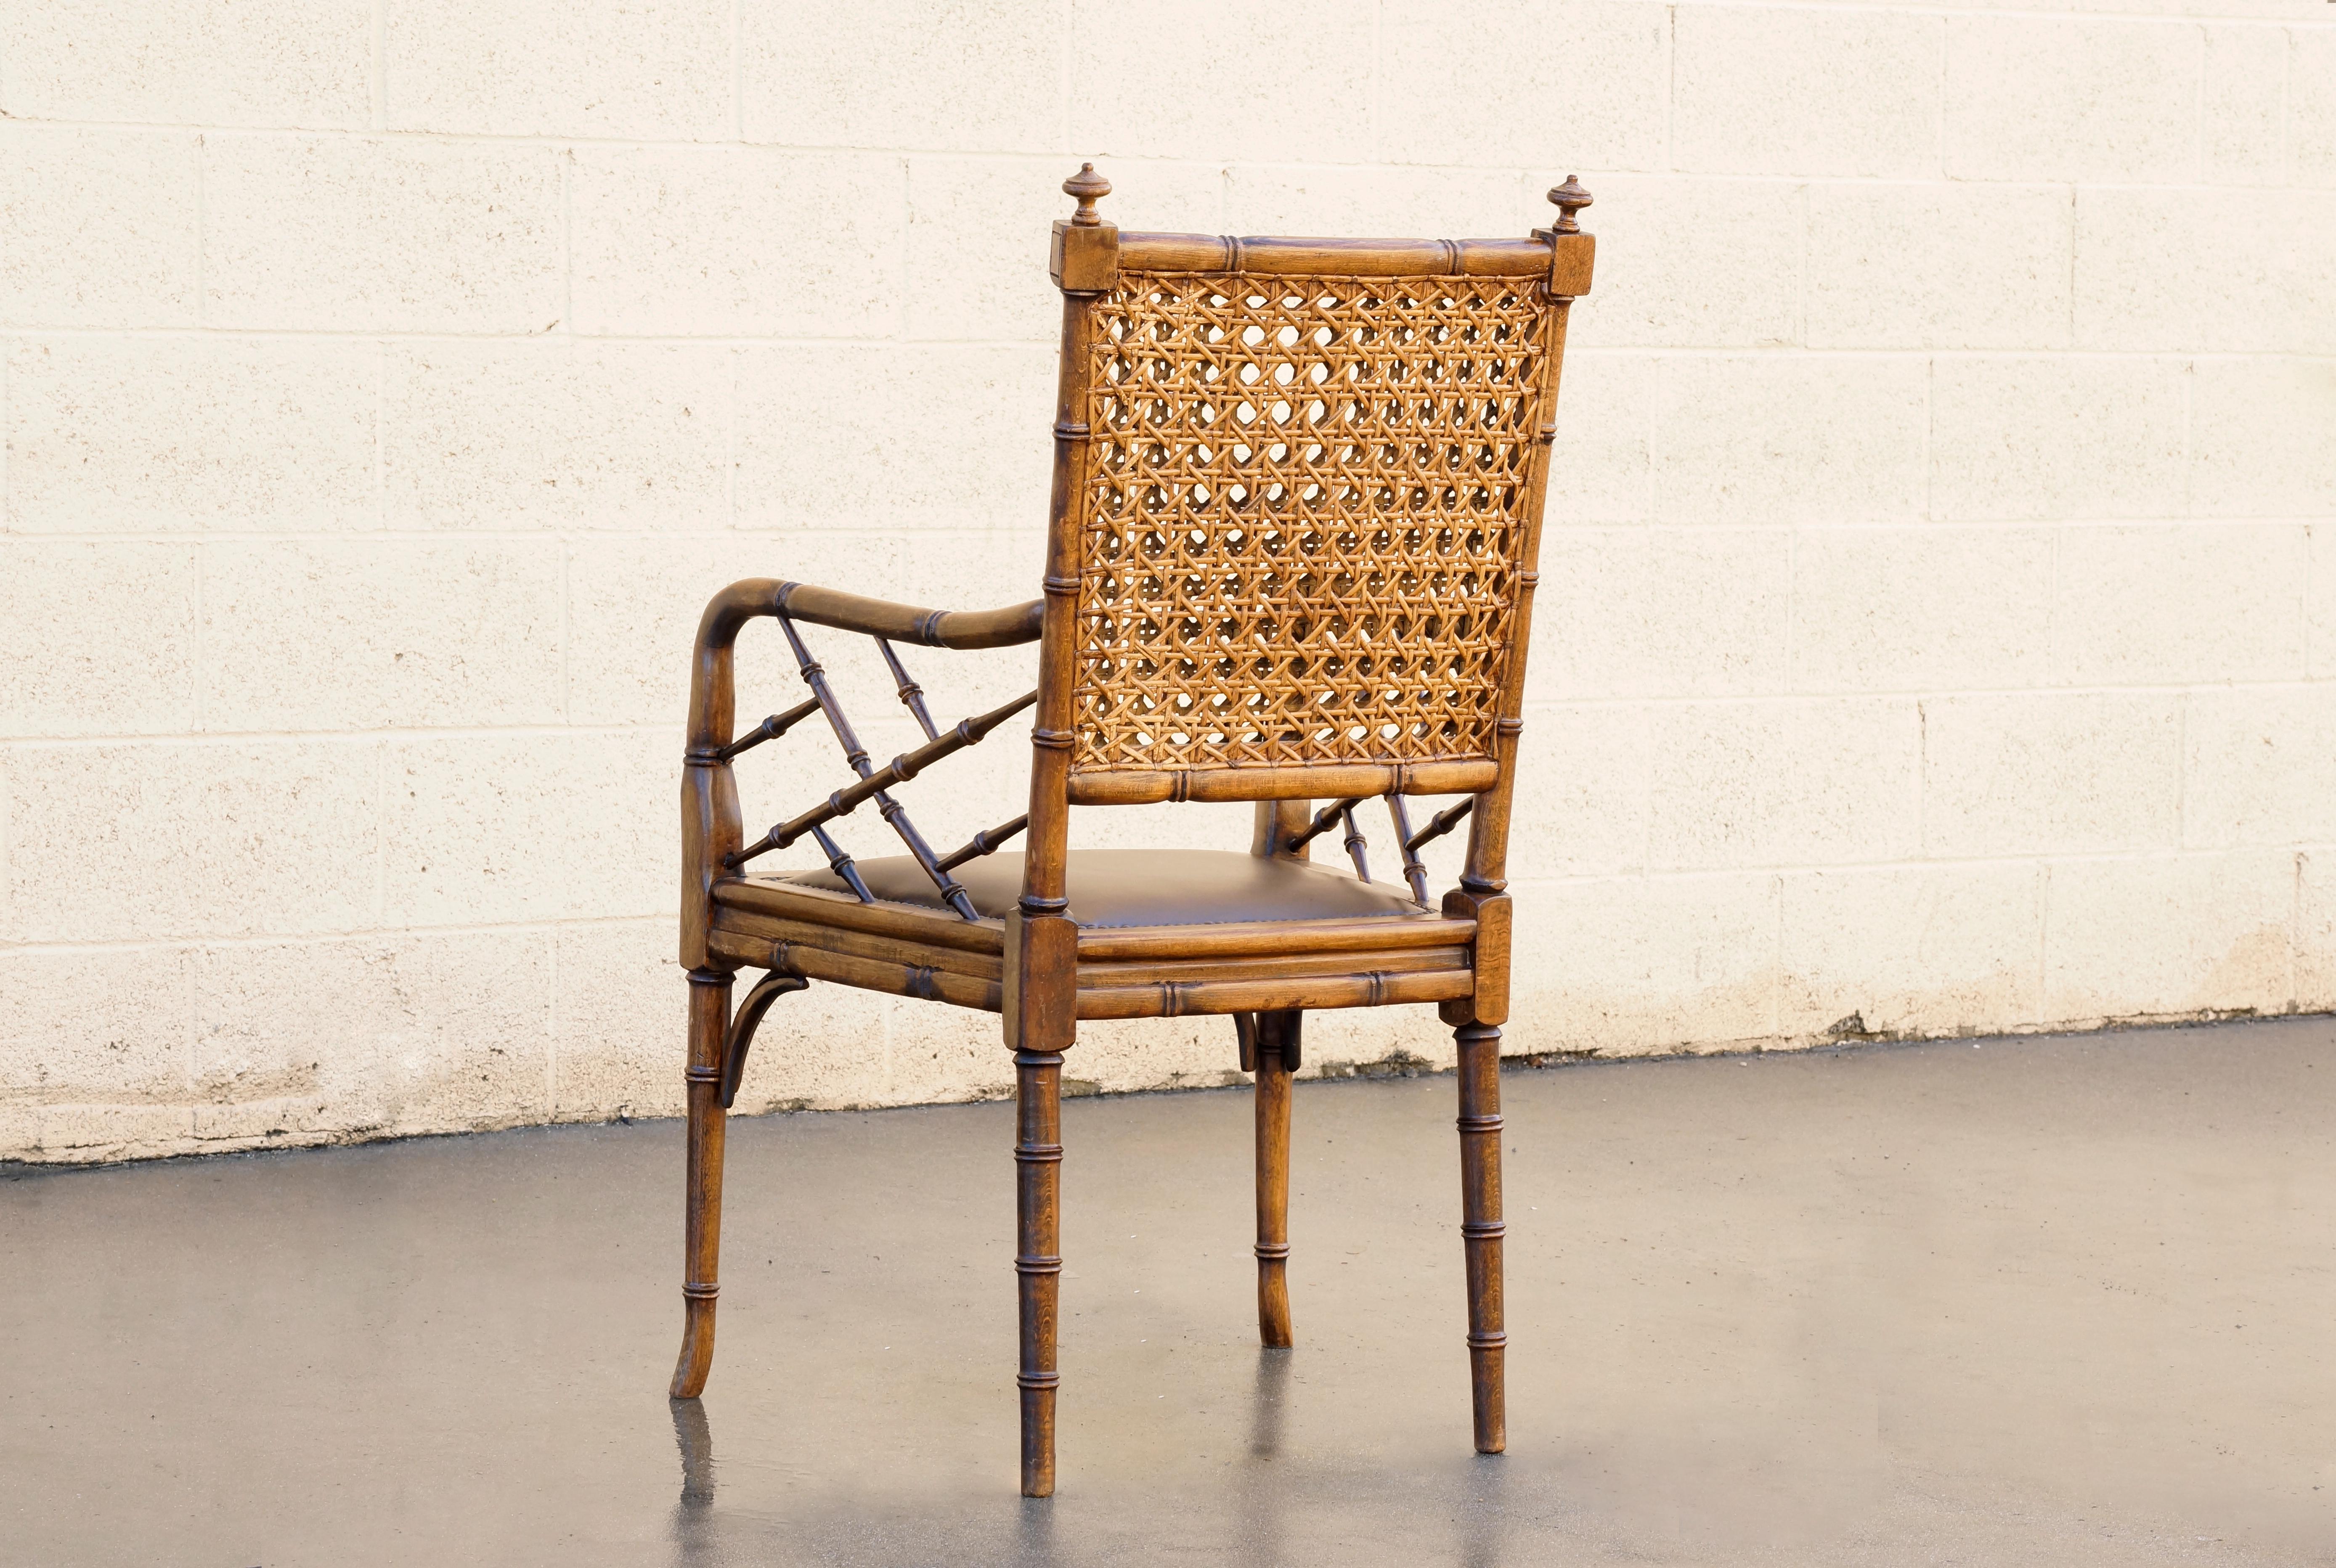 Elegant side chair with featuring bamboo style wood frame, double walled cane back and newly upholstered leather seat with upholstery tacks. Design is reminiscent of the Aesthetics Movement popular in Britain the late 1800s which emphasized a Far